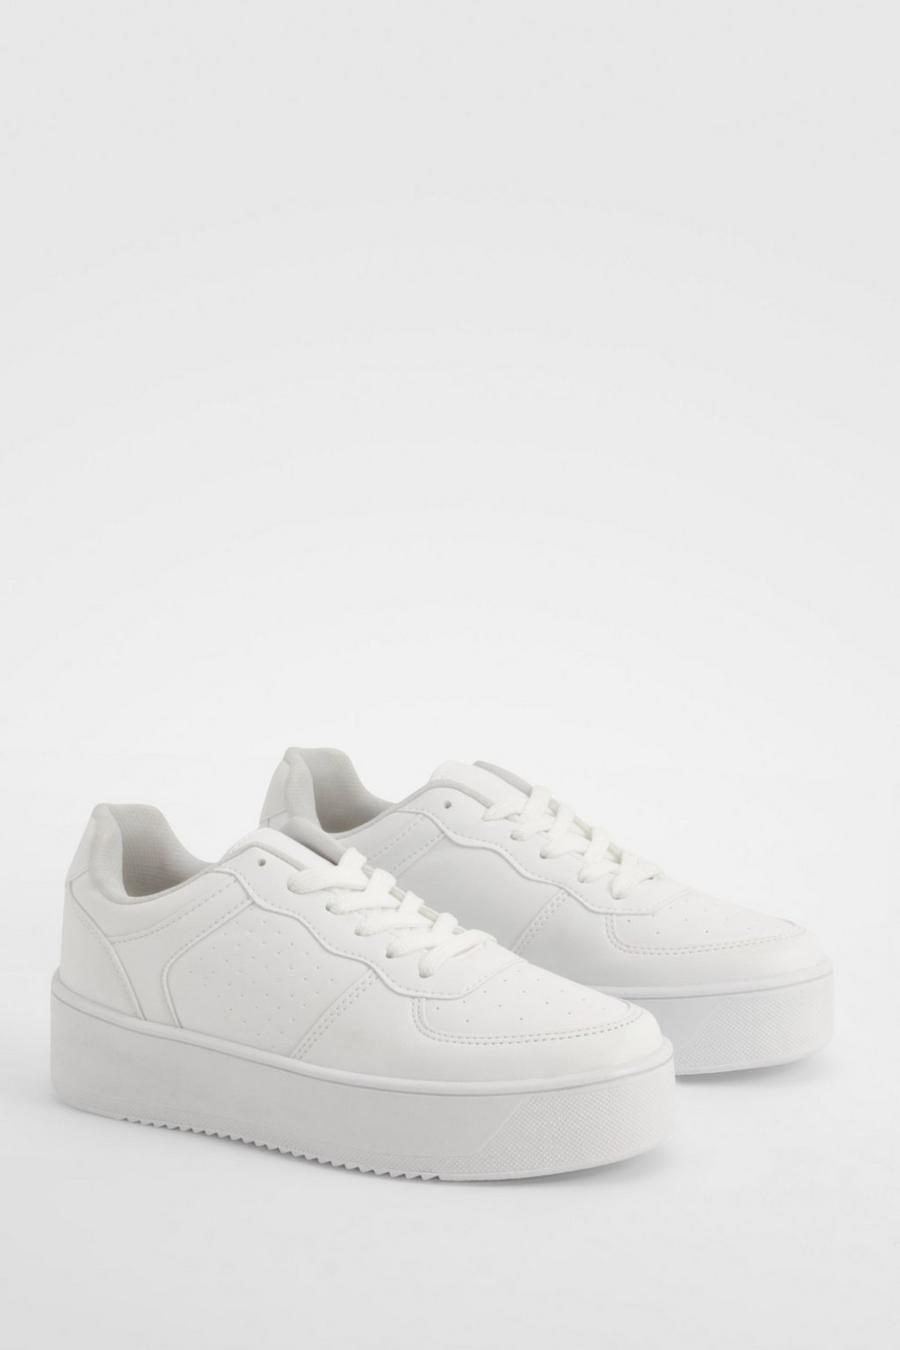 White Chunky Platform Sole Contrast Panel Abx     